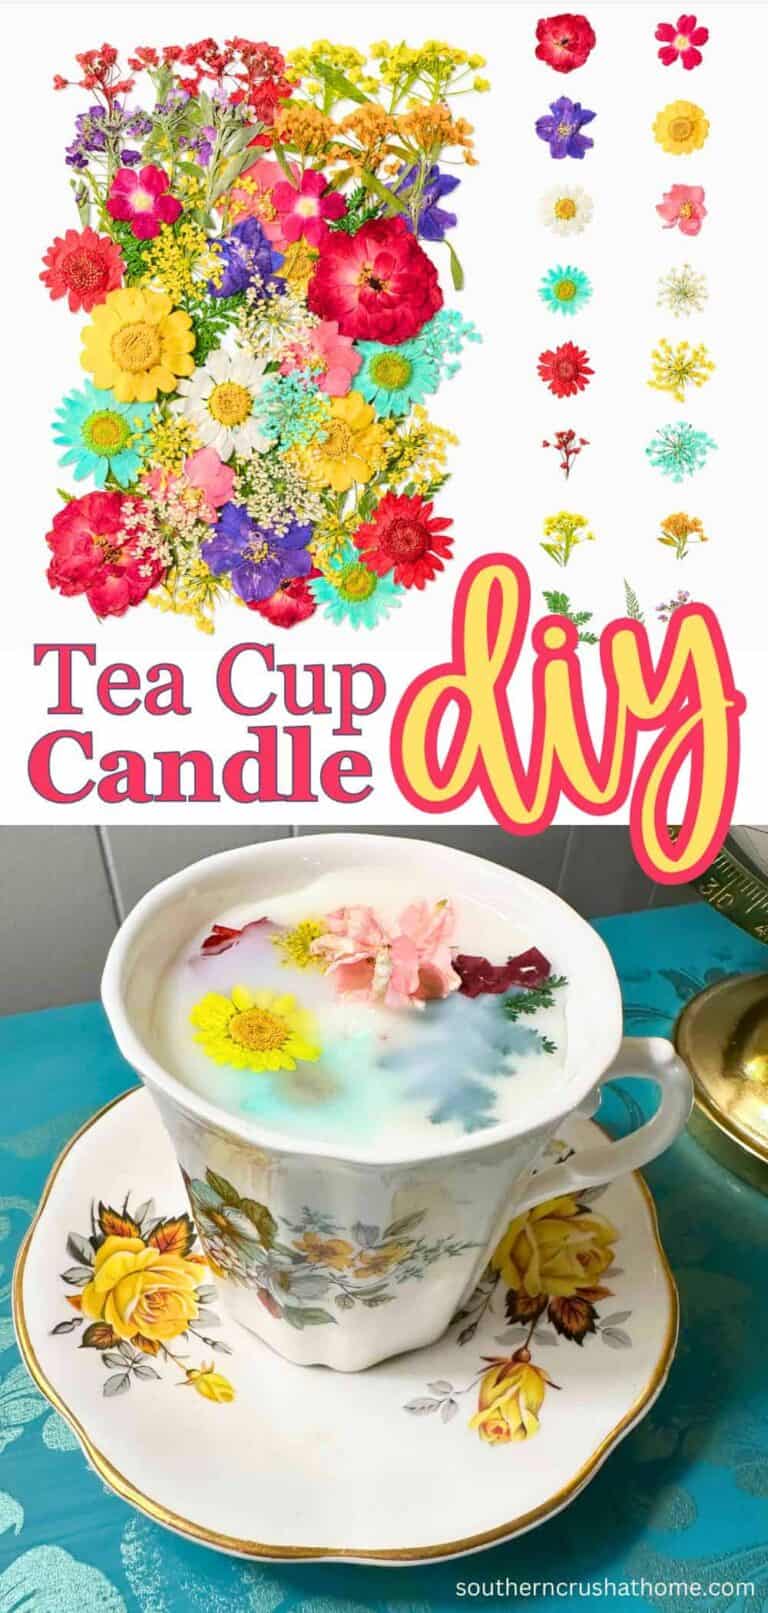 How to Make Your Own Tea Cup Candle with Dried Flowers